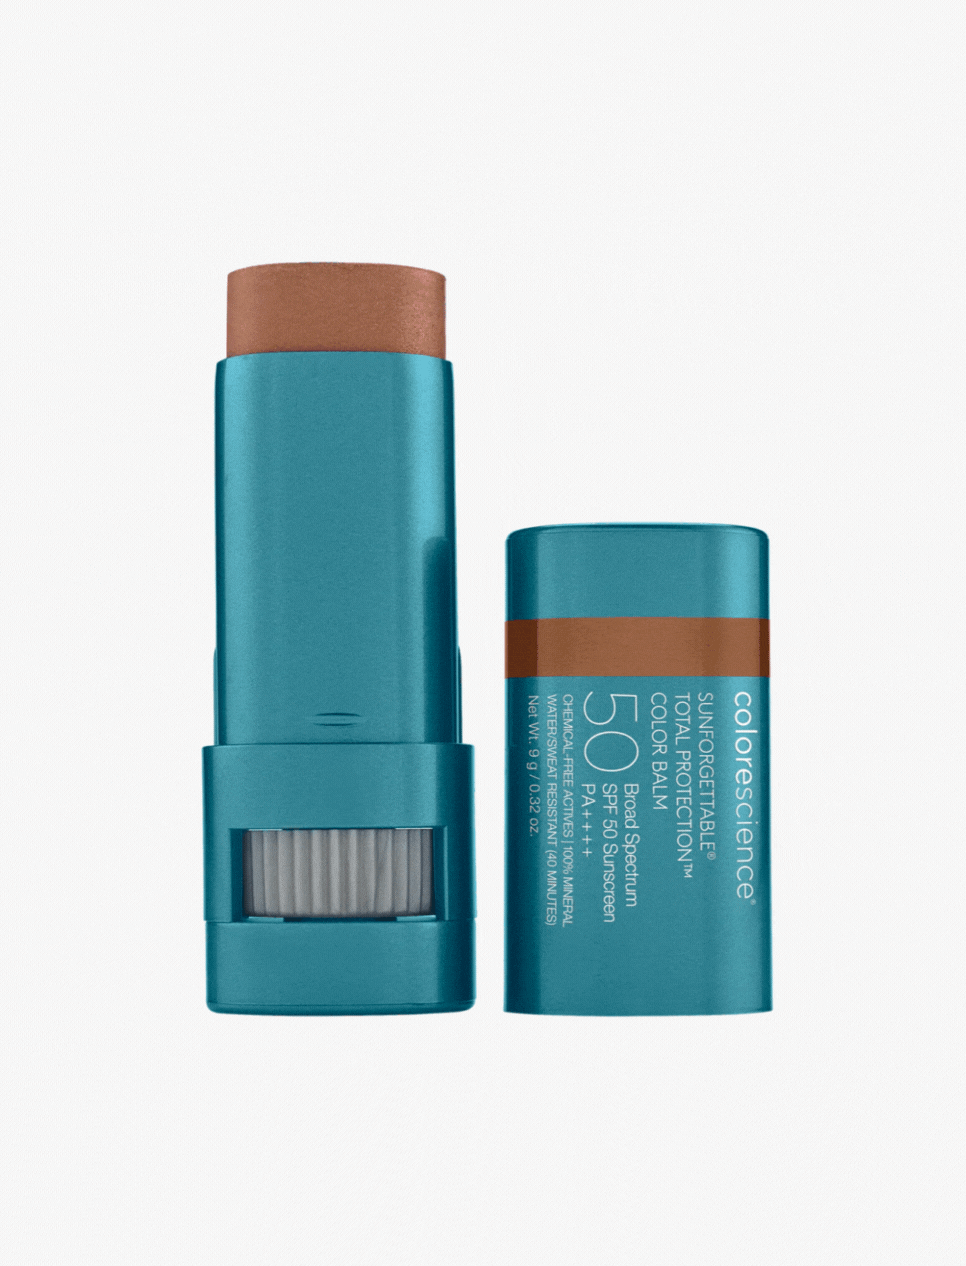 TOTAL PROTECTION COLOR BALM SPF 50